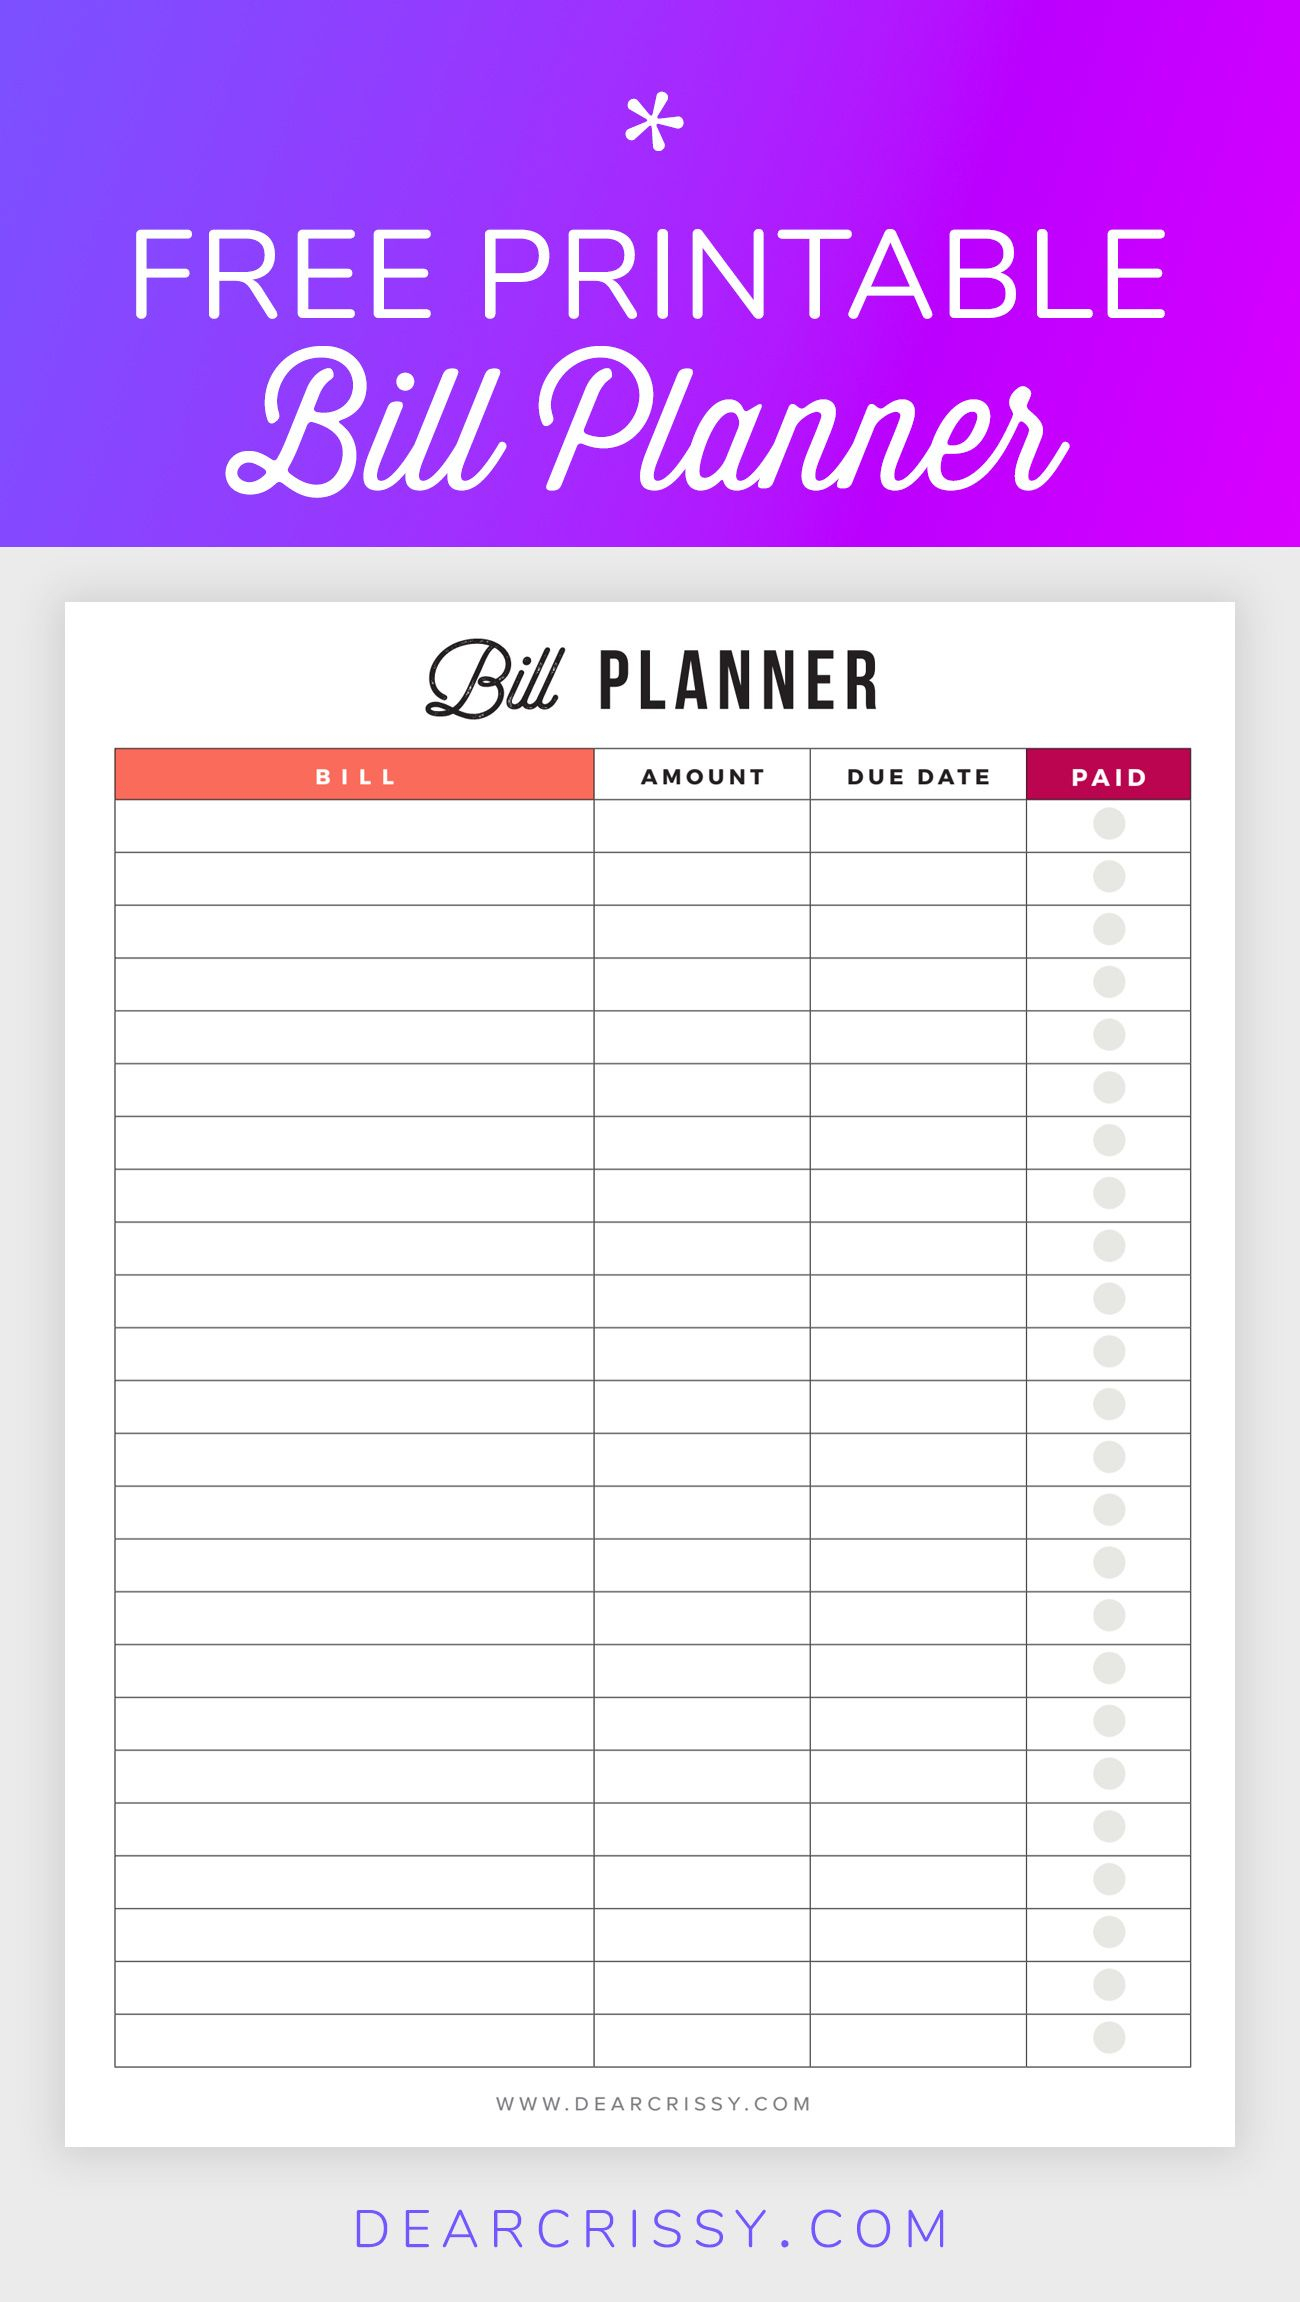 Bill Planner Printable - Pay Down Your Bills This Year! | Organizing - Free Printable Bill Planner